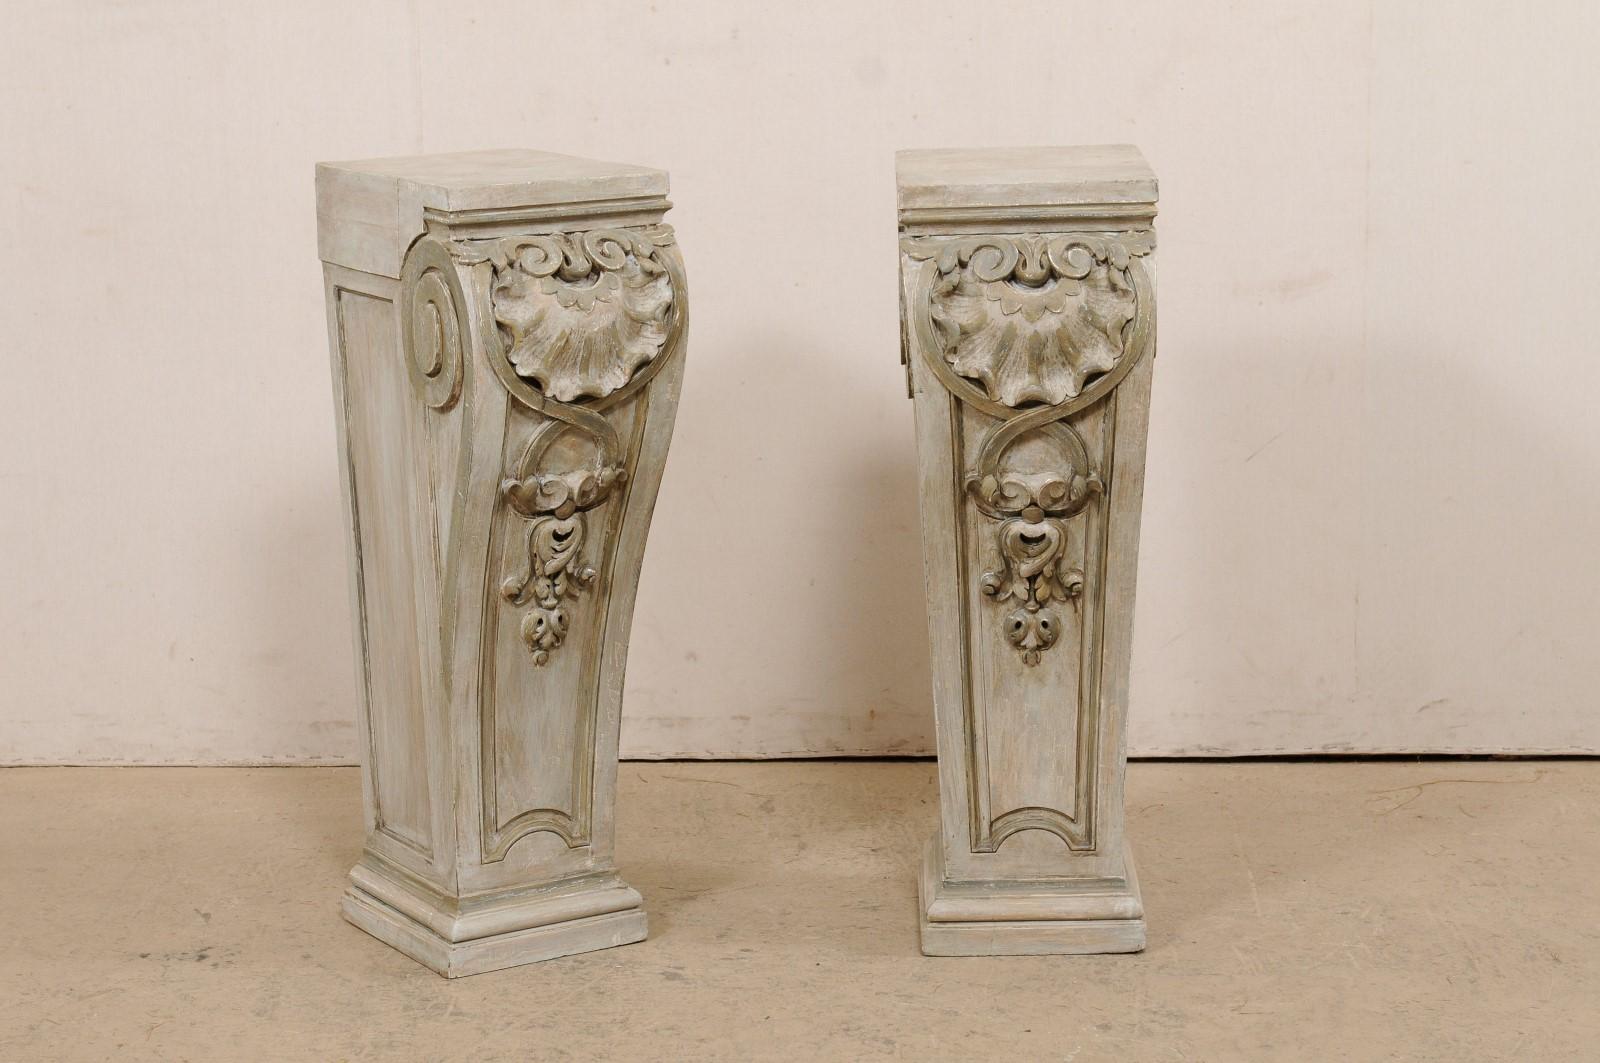 A pair of American carved-wood pedestals from the early 20th century. This antique pair of pedestals have been carved in a shell, foliage and volute motif. The rectangular-shaped tops are flat, and stick out farther from the lower more squared